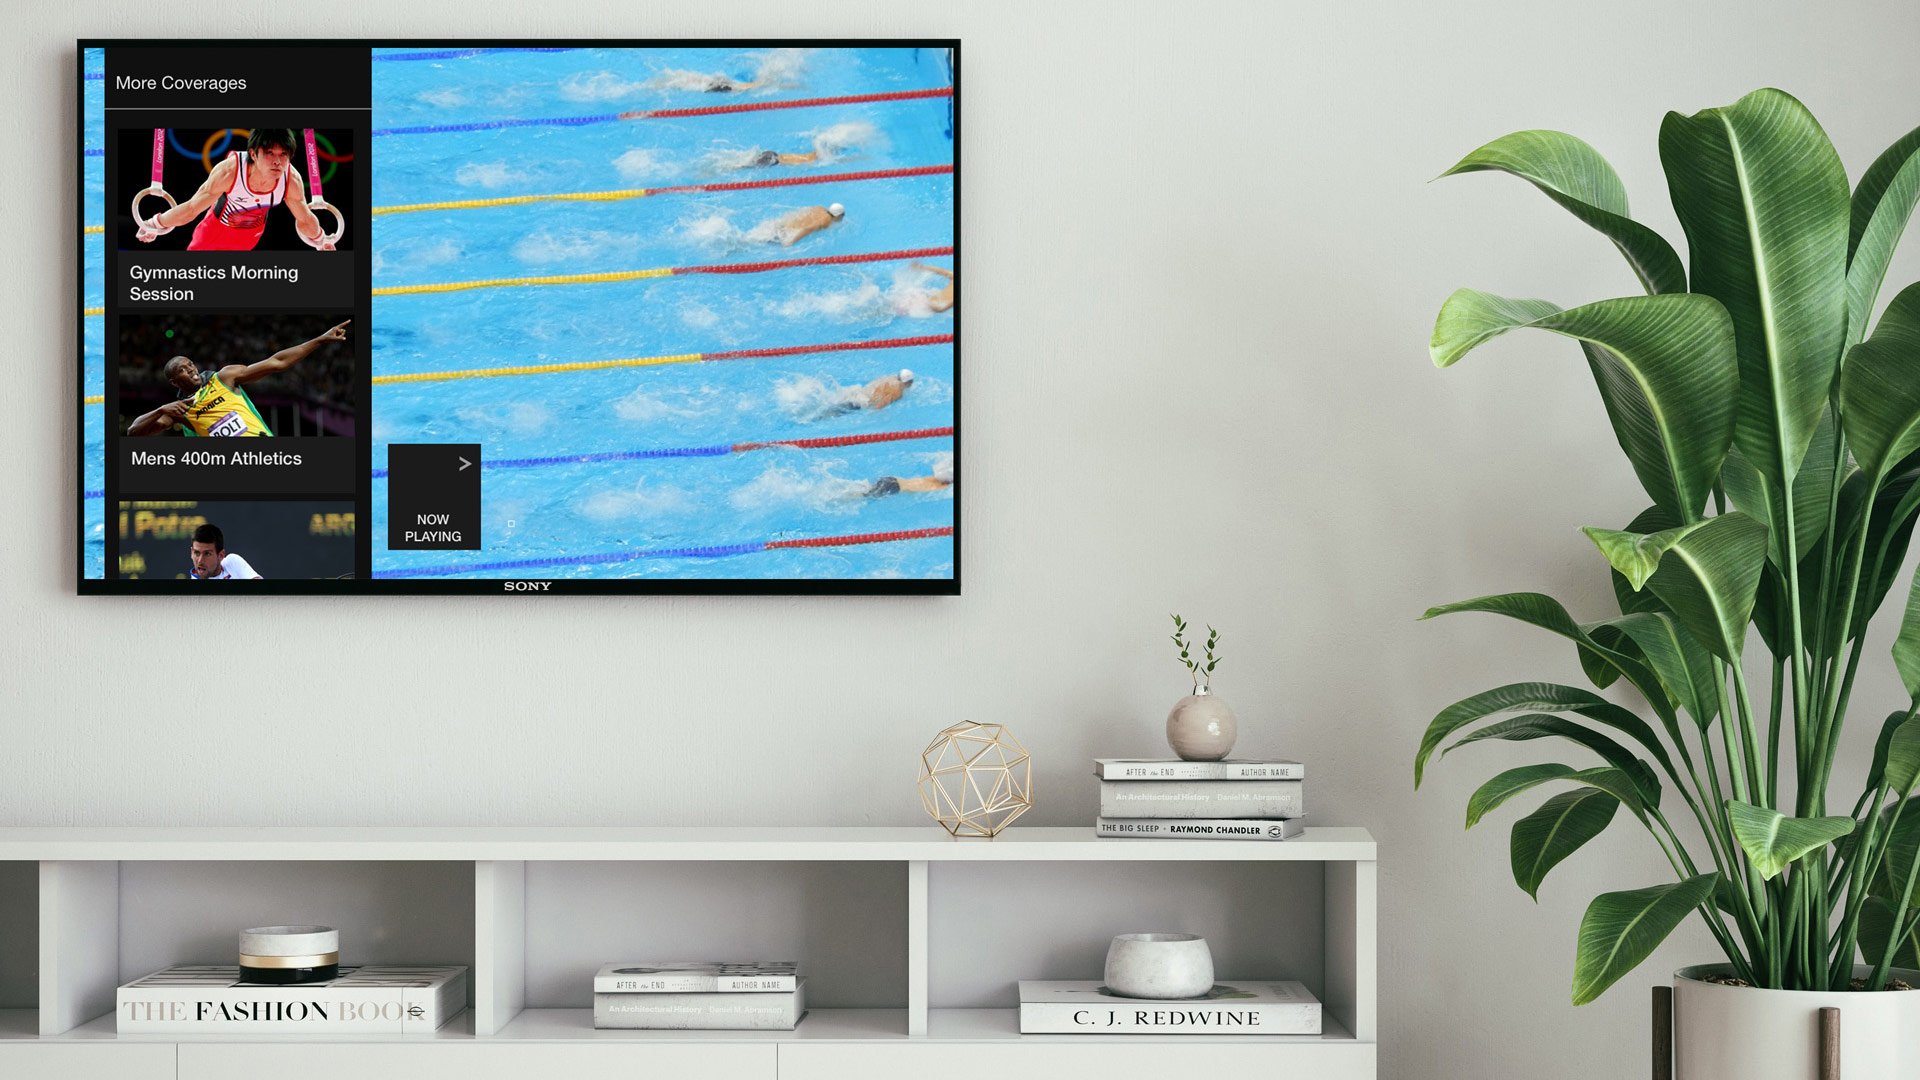 A TV is mounted on the wall of a living room, showing a mockup of the Red Button+ interface. This interface enables the user to switch their current stream. In the background, there is a still image of six swimmers in a pool.